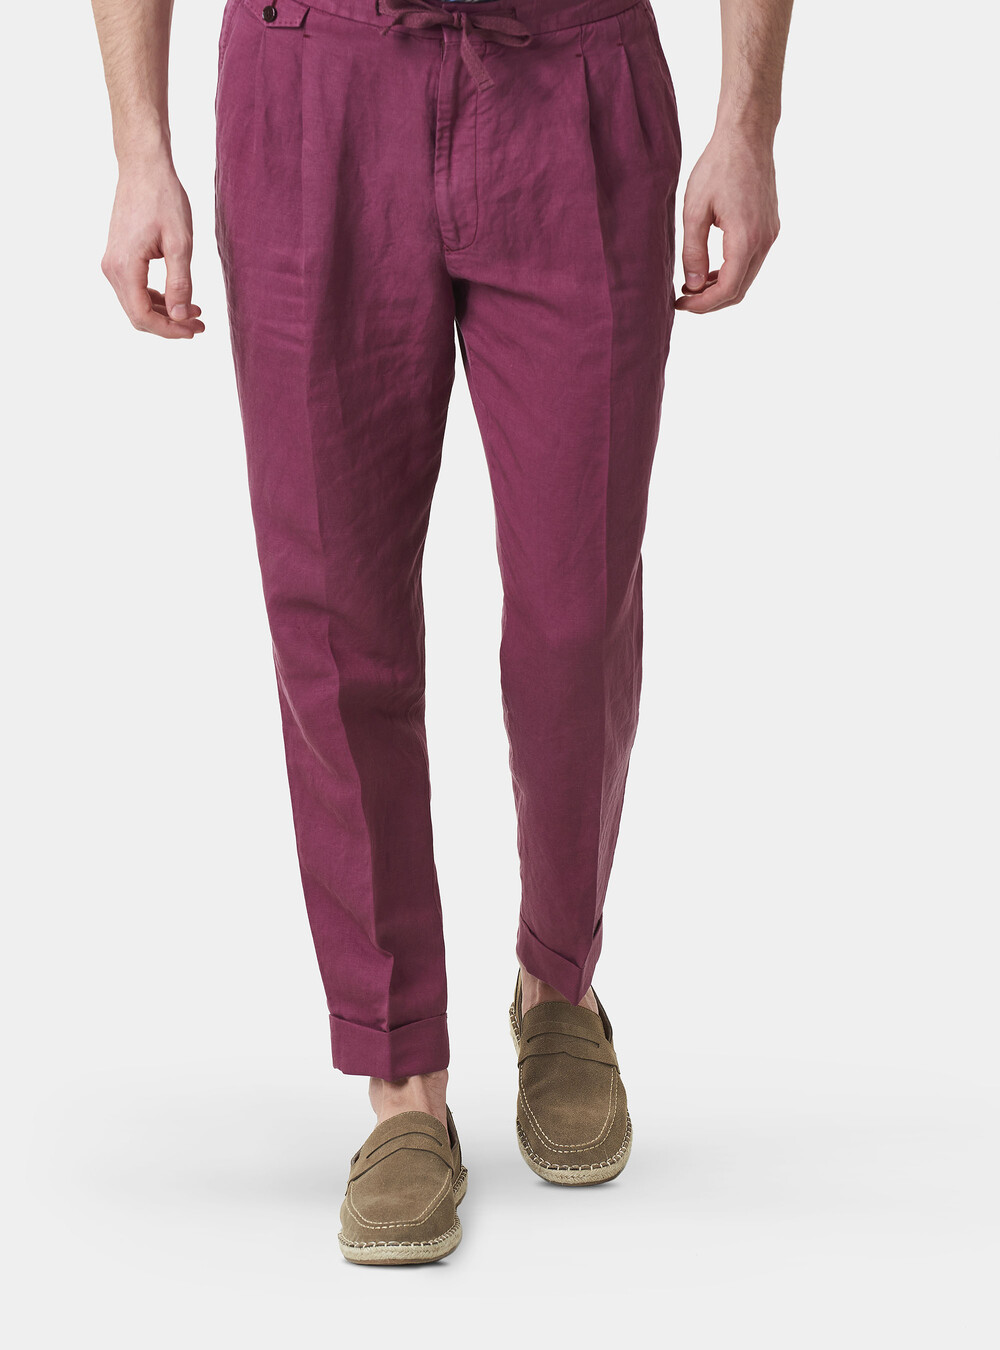 Linen blend trousers with elastic and drawstrings | GutteridgeEU | Trousers  Uomo